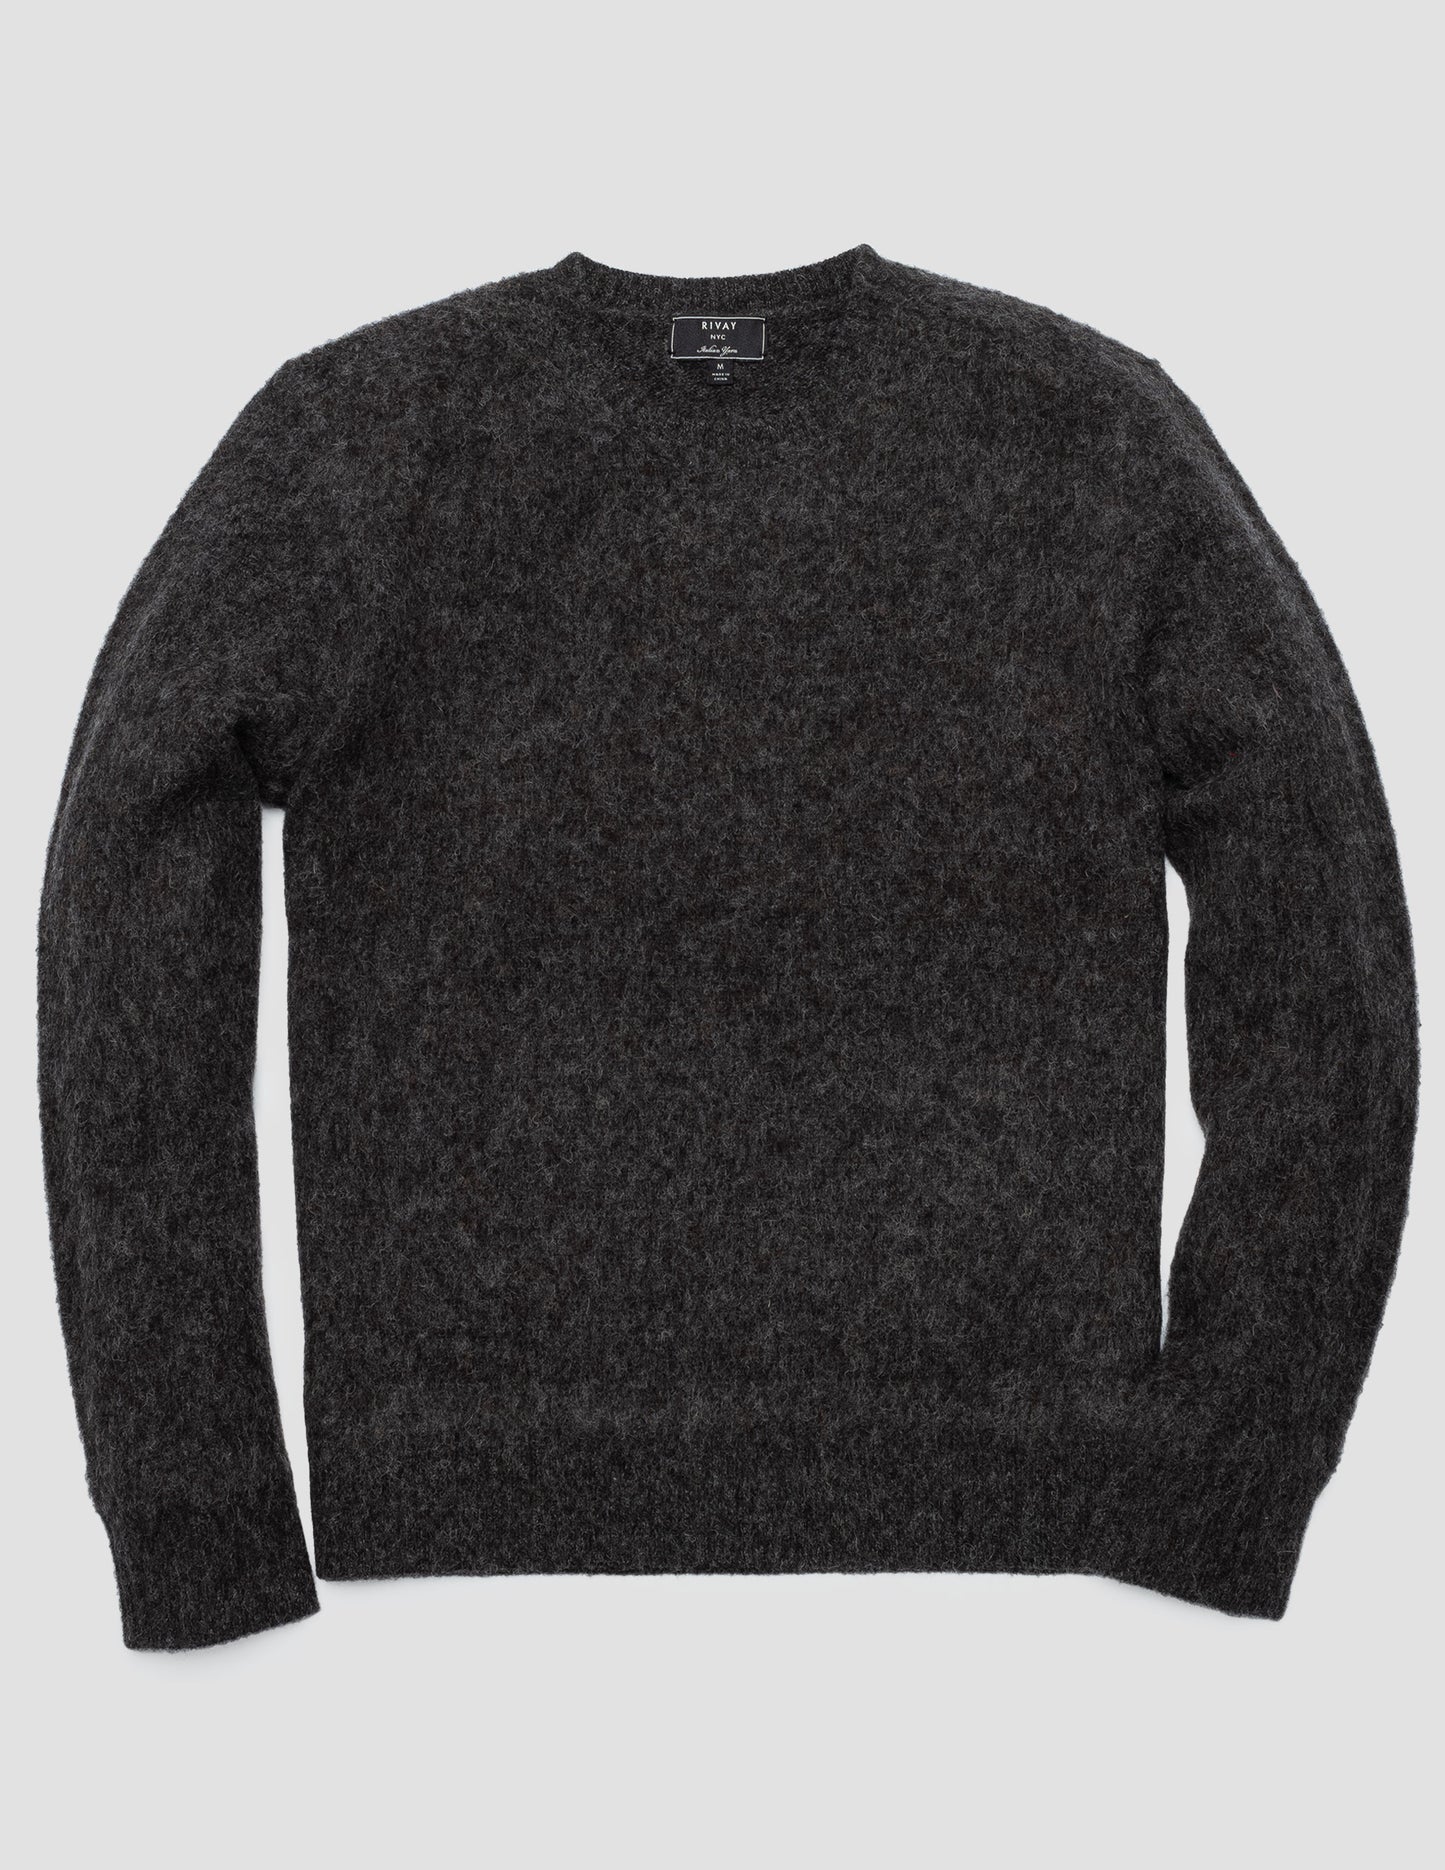 Rivay Highlands Shetland Sweater in Charcoal